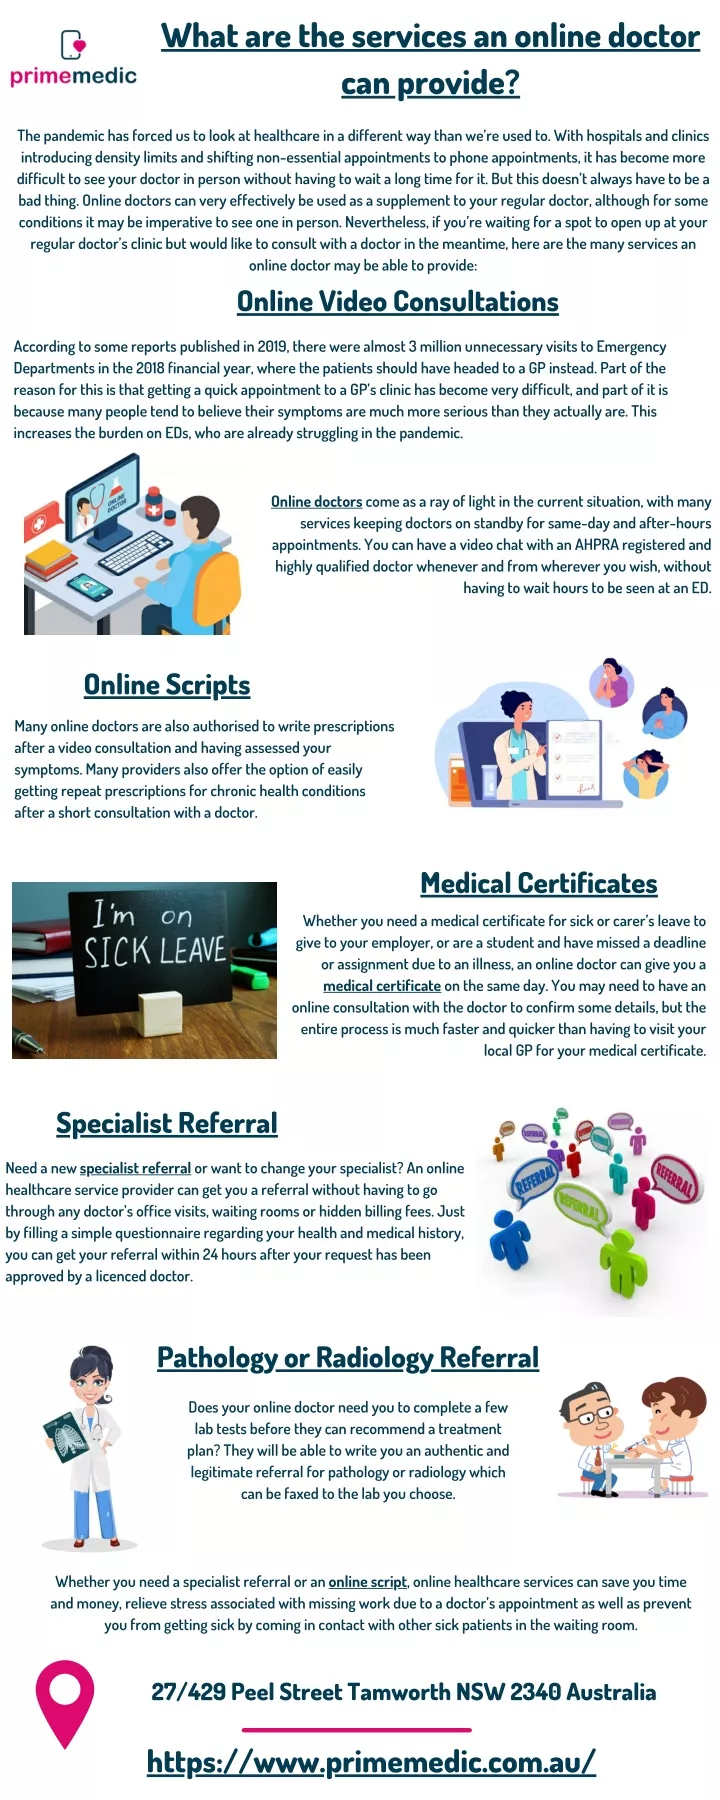 what are the services an online doctor can provide